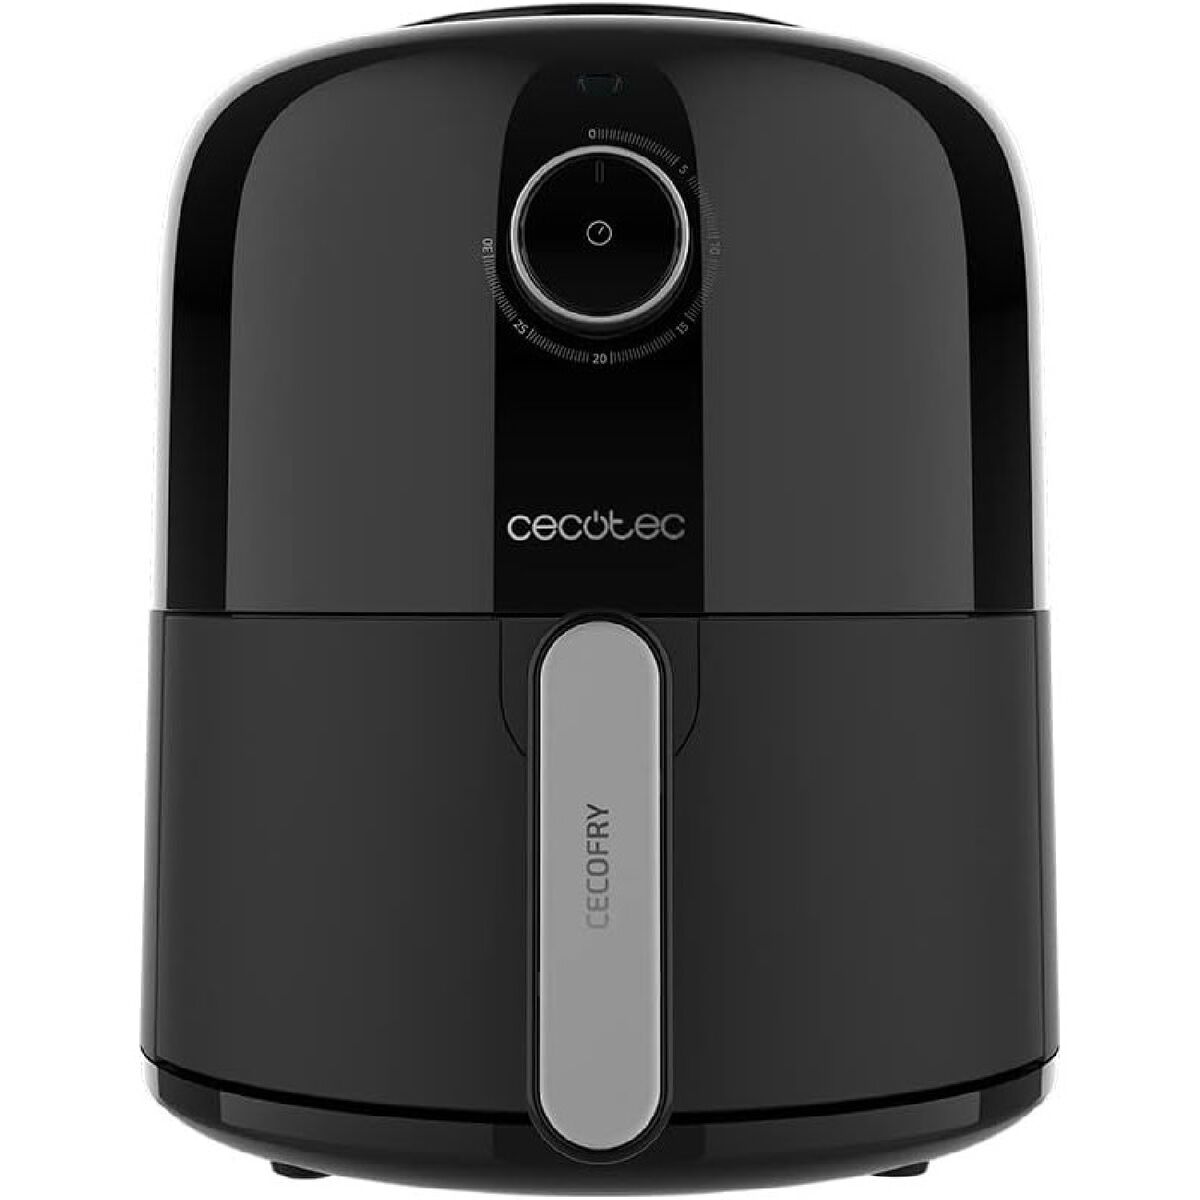 Luchtfriteuse Cecotec Cecofry Pixel 2500 1200 W 2,5 L